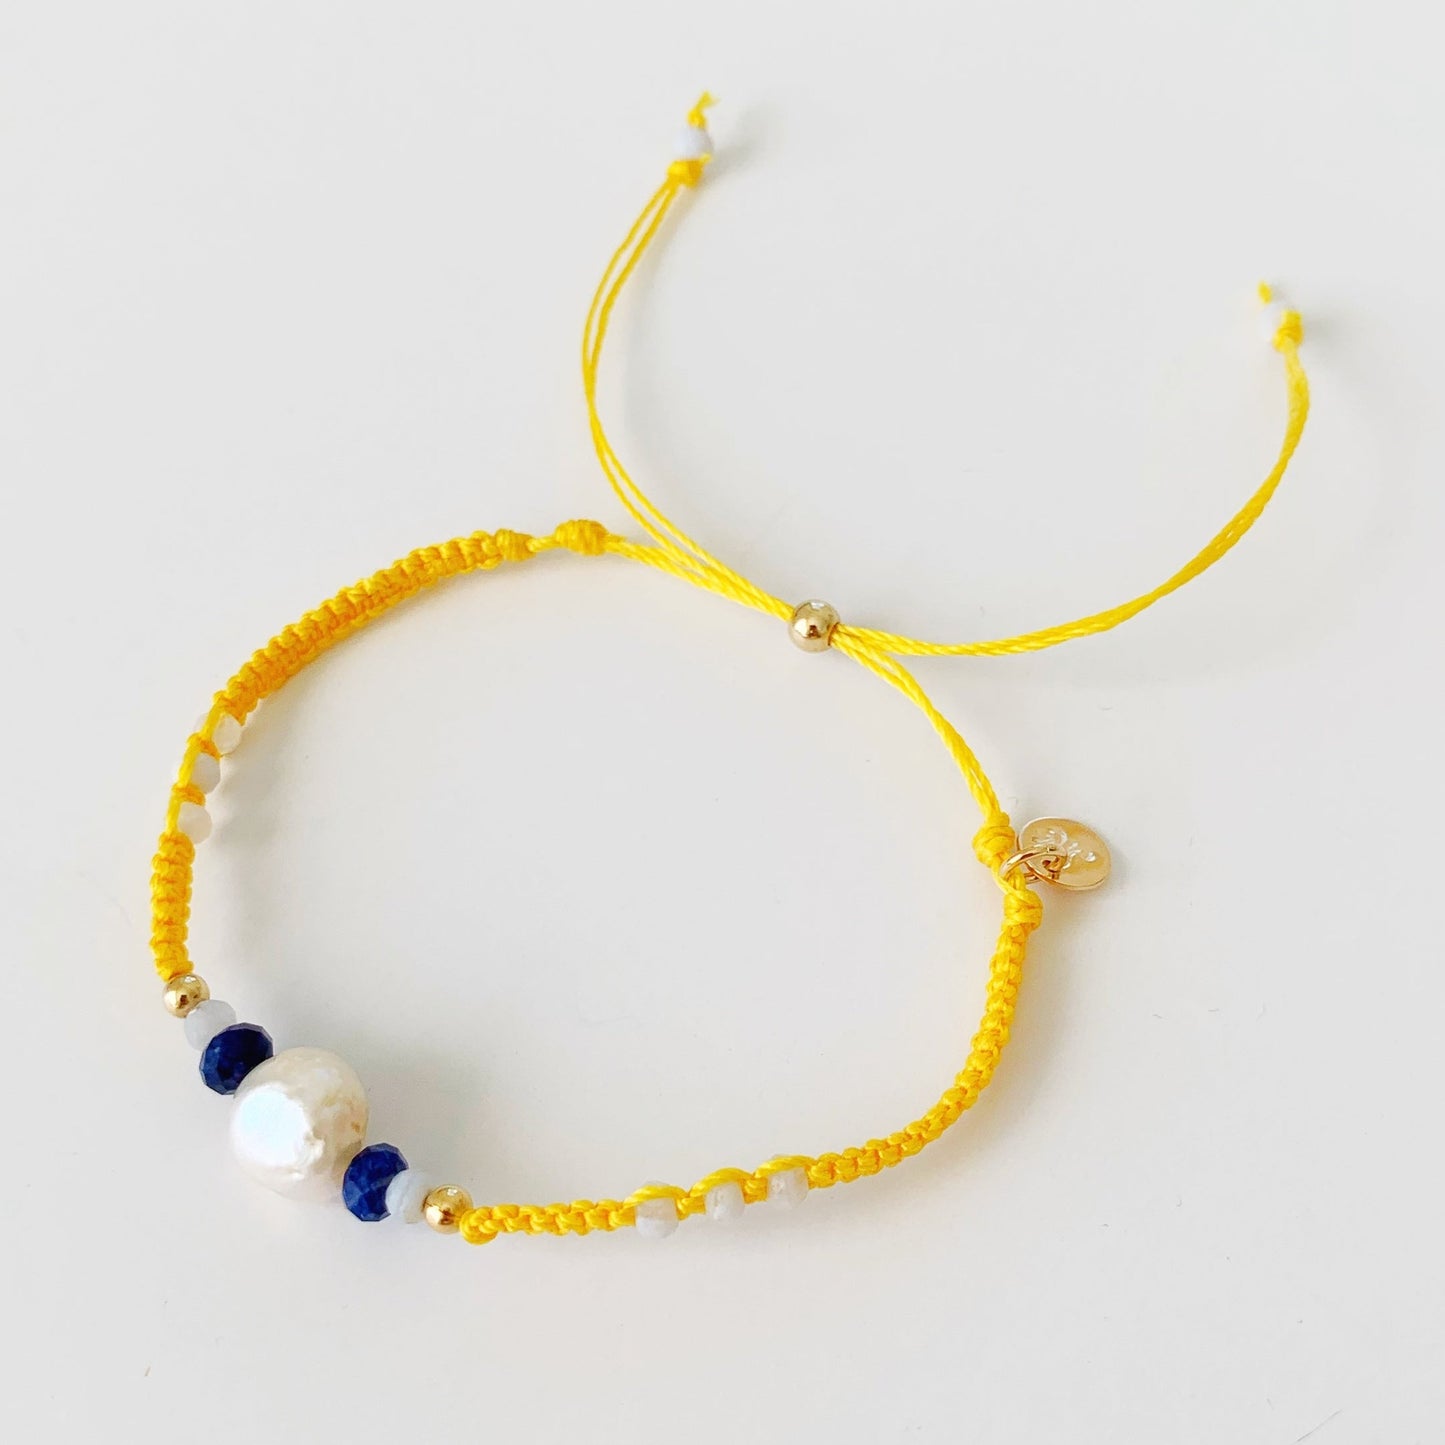 the yellow macrame bracelet is photographed from a top view over a white surface